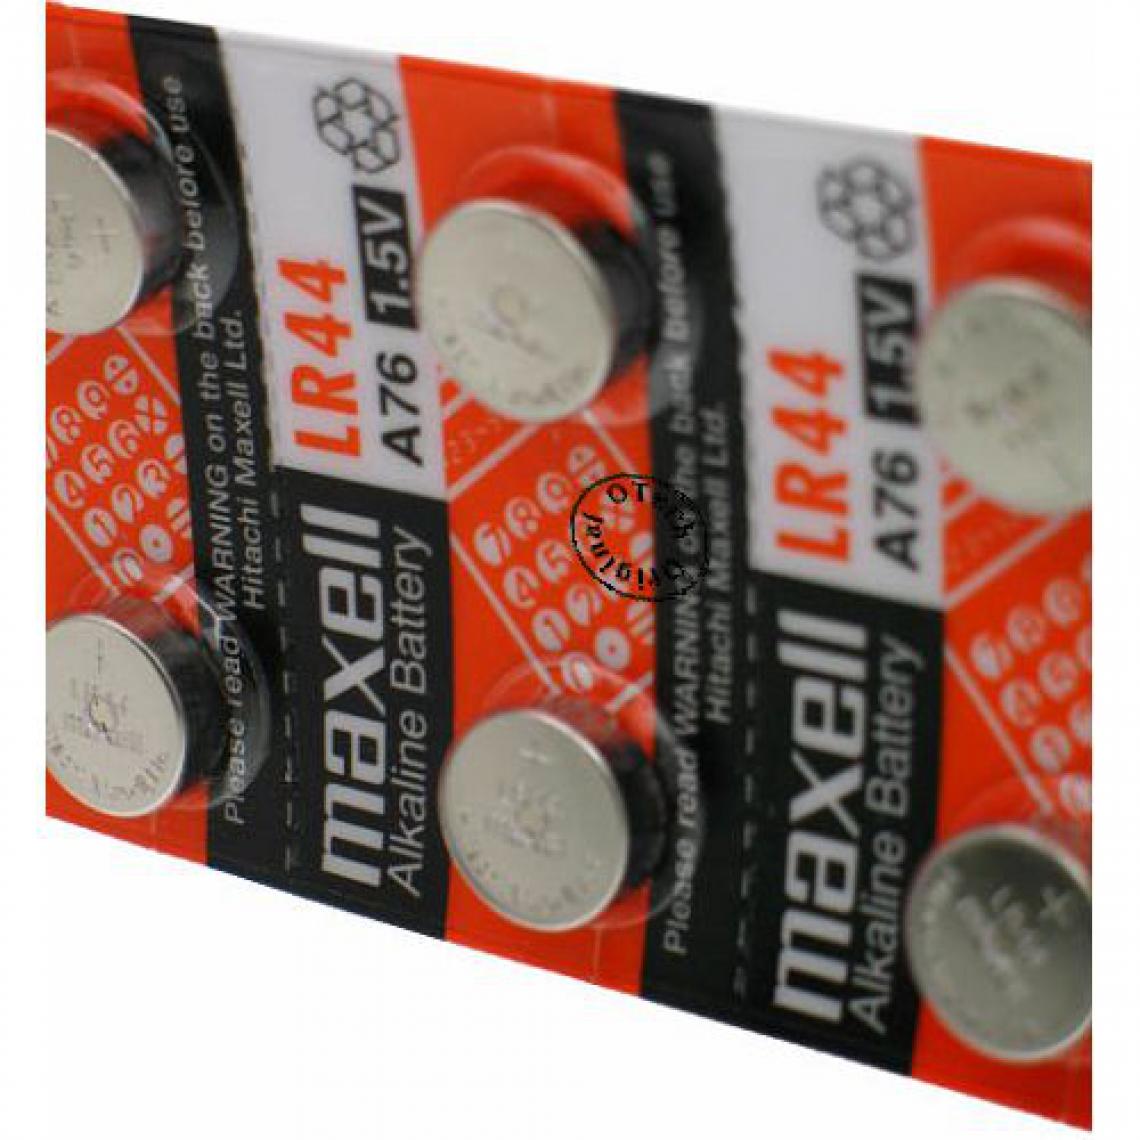 Otech - Pack de 10 piles maxell pour MAXELL GPS76A - Piles rechargeables